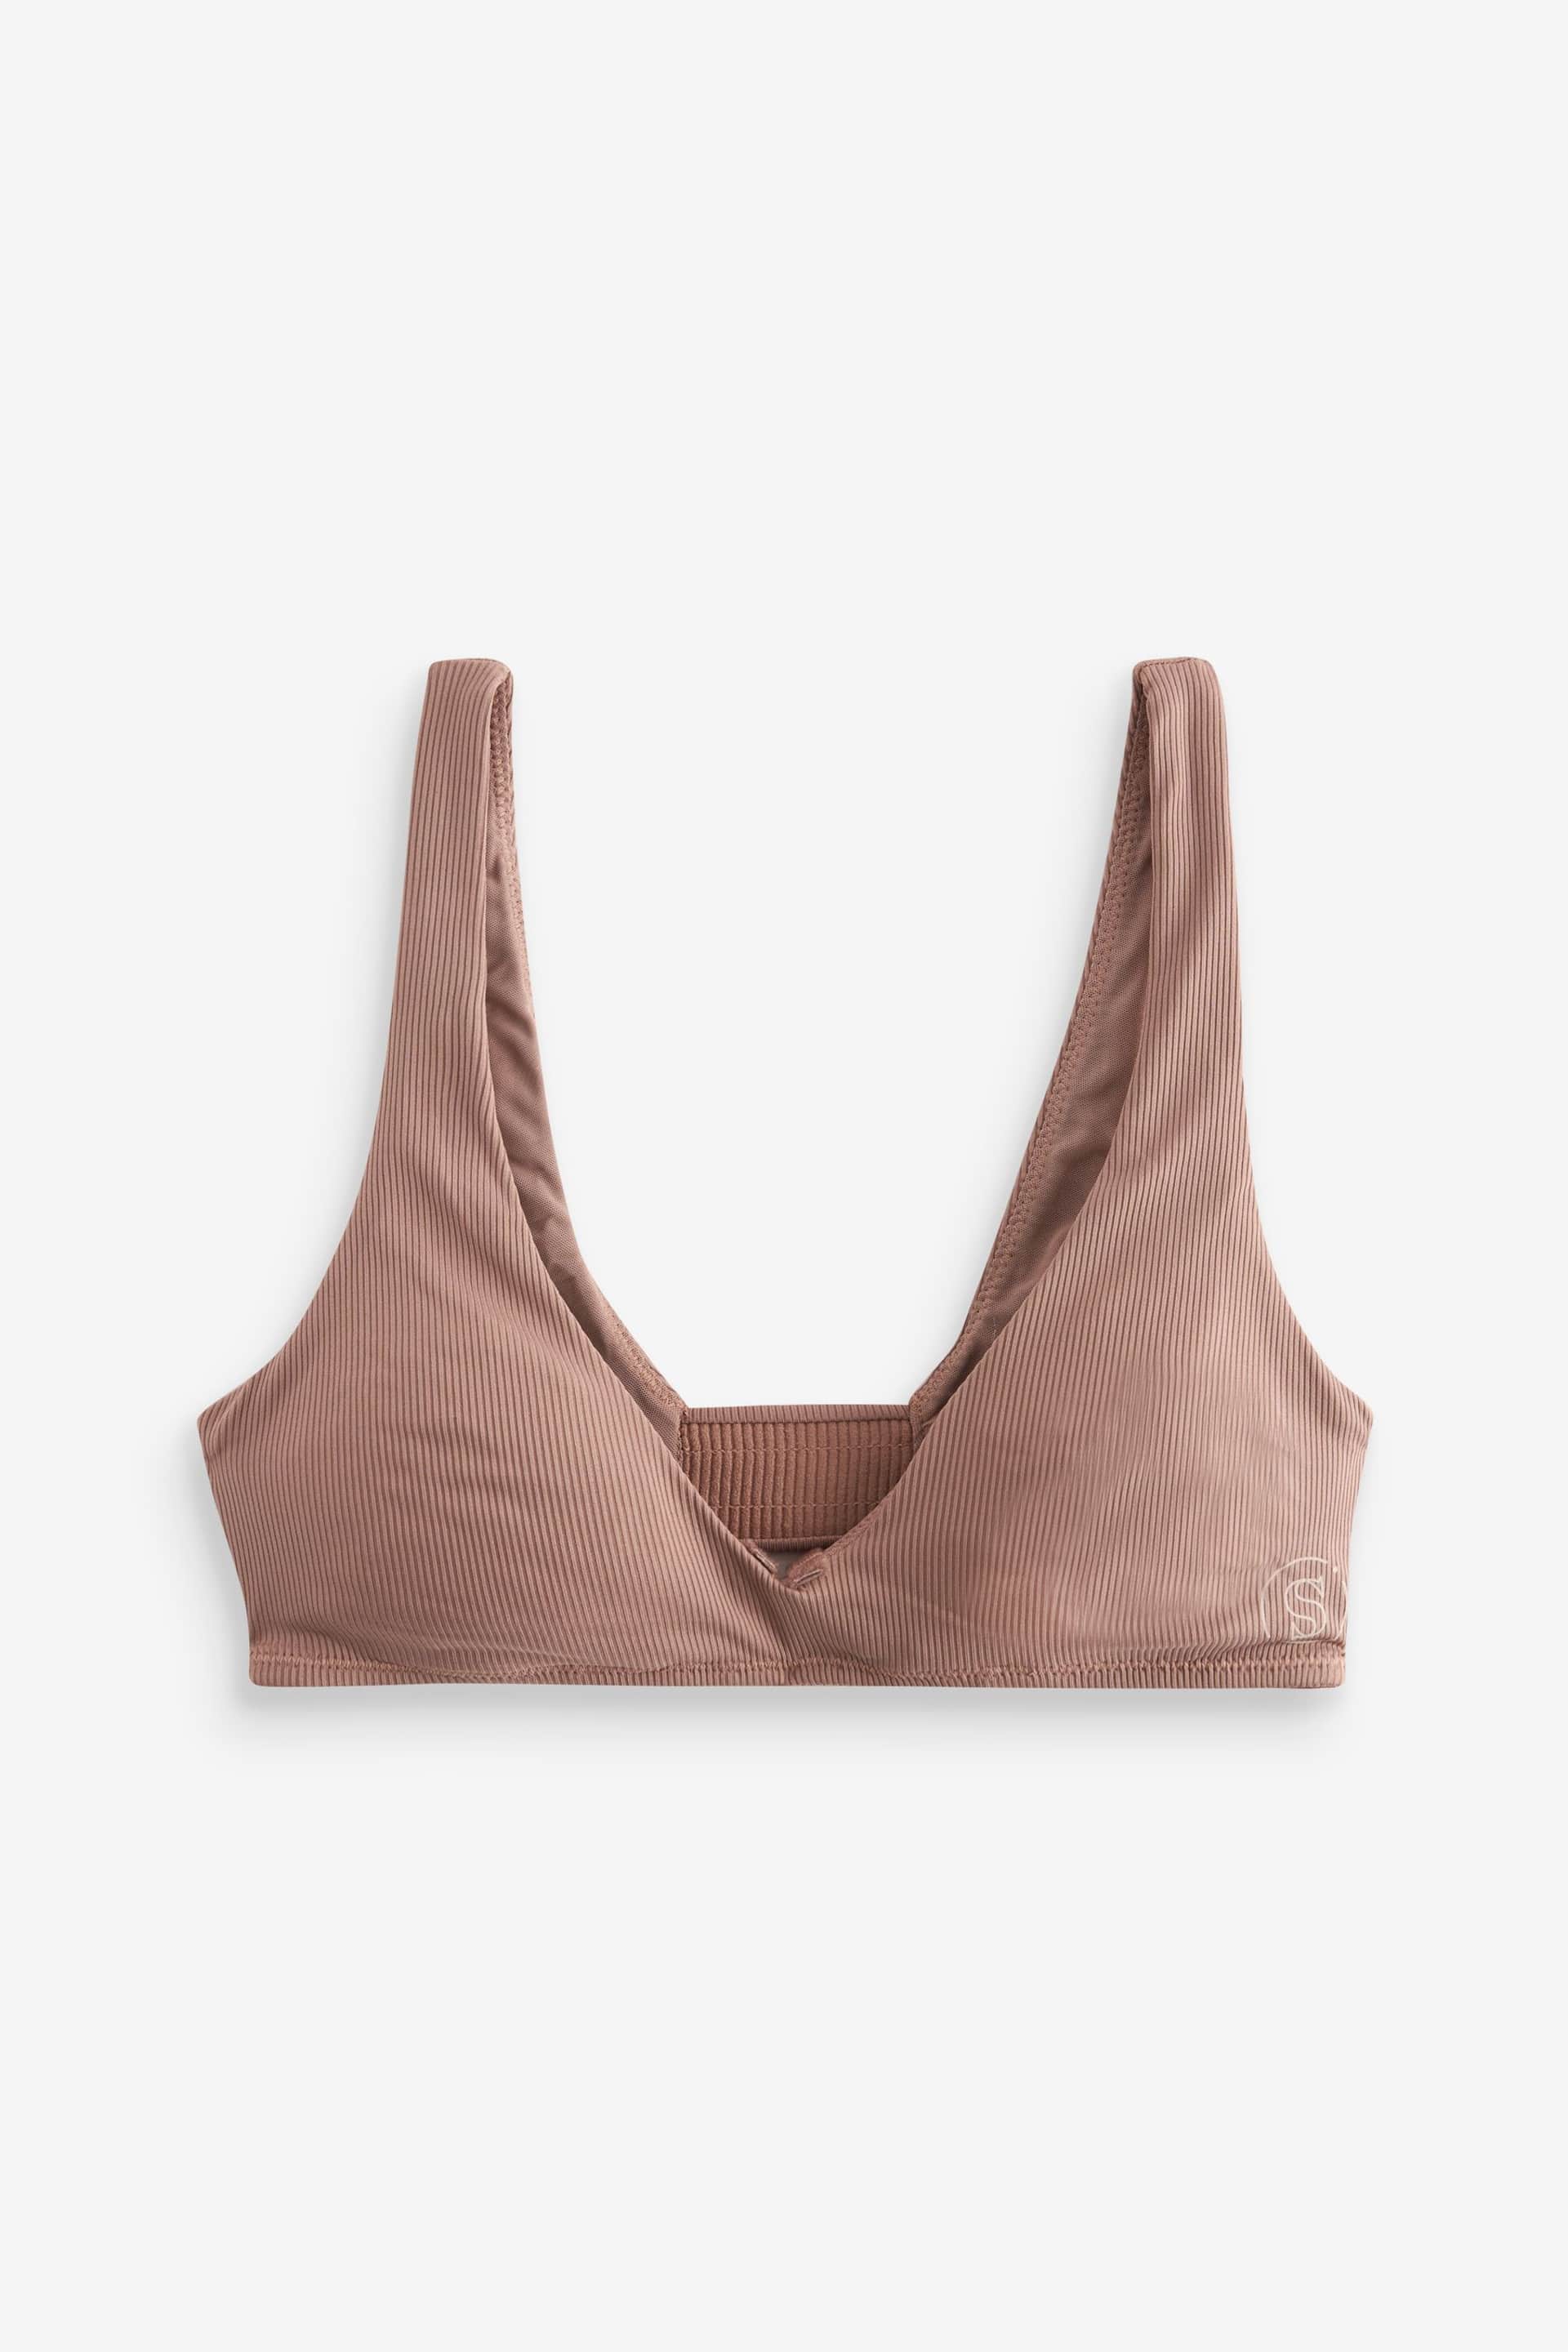 self. Mink Brown Ribbed Non Wire Plunge Pull-On Crop Bra - Image 5 of 7